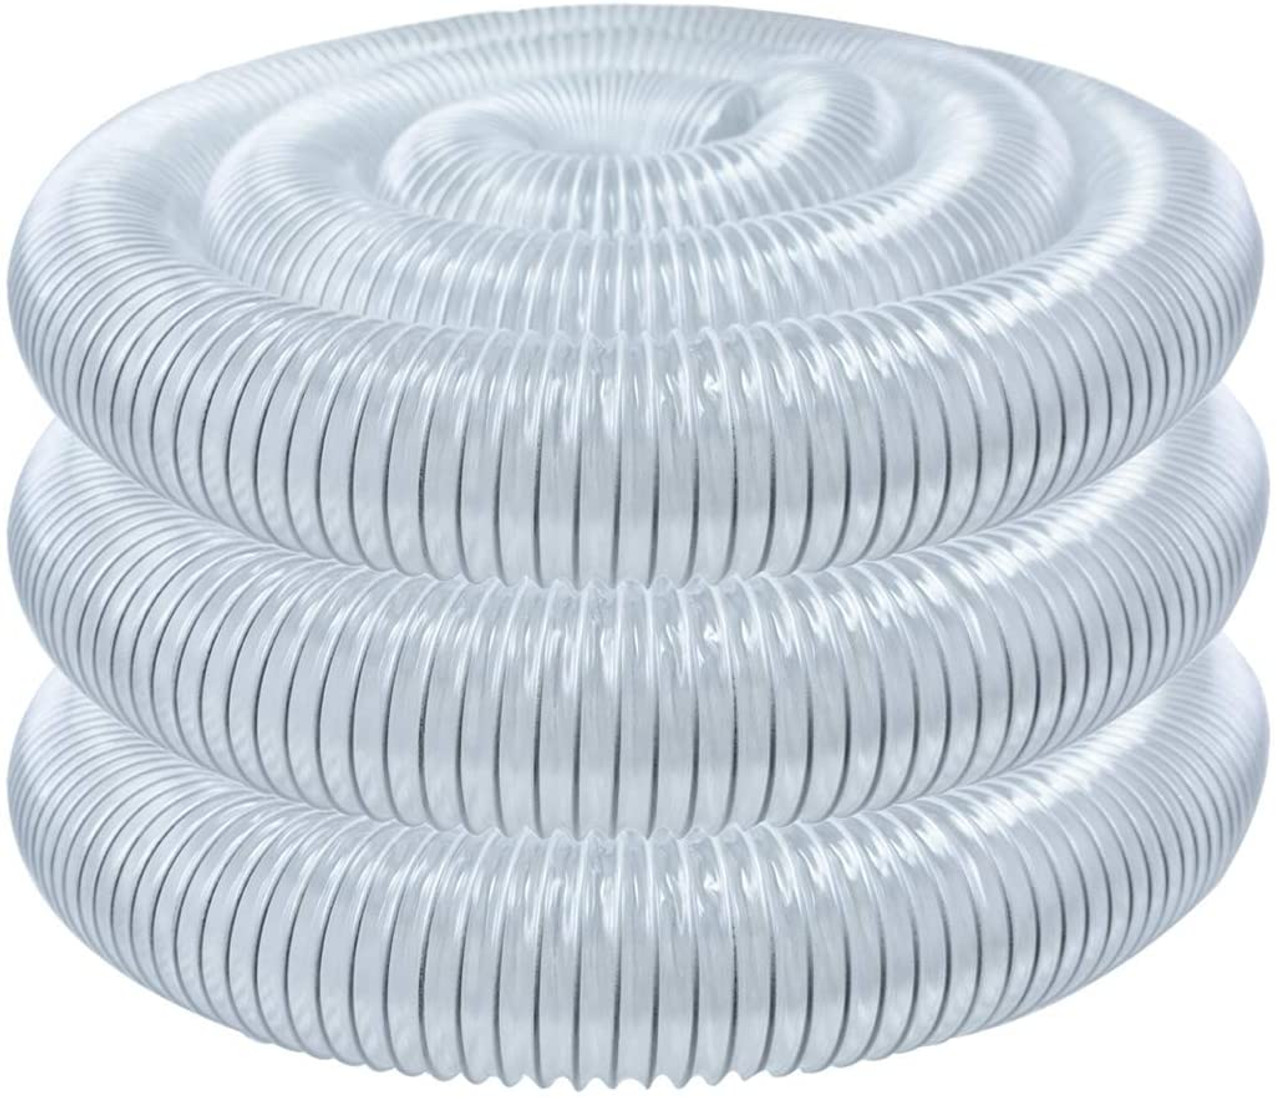 Therwen 4 x 70 ft Clear PVC Dust Collection Hose, Heavy Duty Dust Debris  and Fume Collection Hose, Flexible Clear Vacuum Hoses